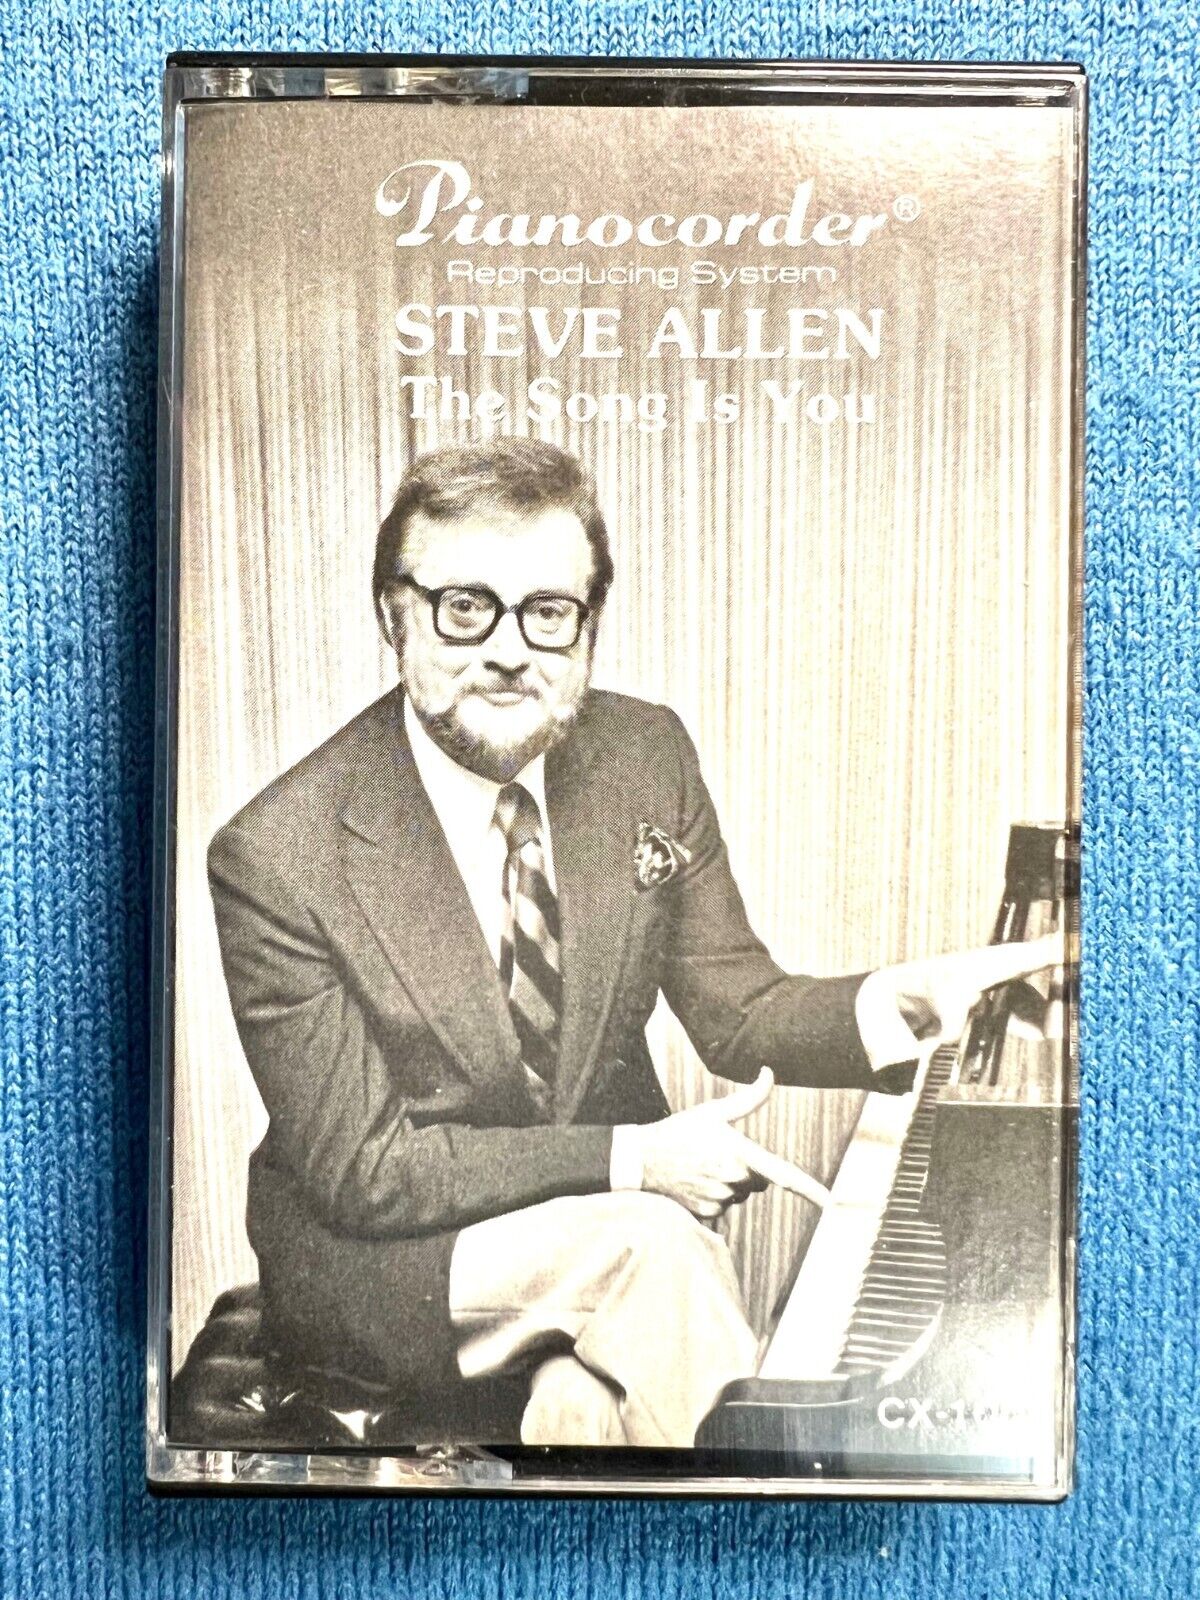 Pianocorder Reproducing System Steve Allen The Song Is You CassetteTape